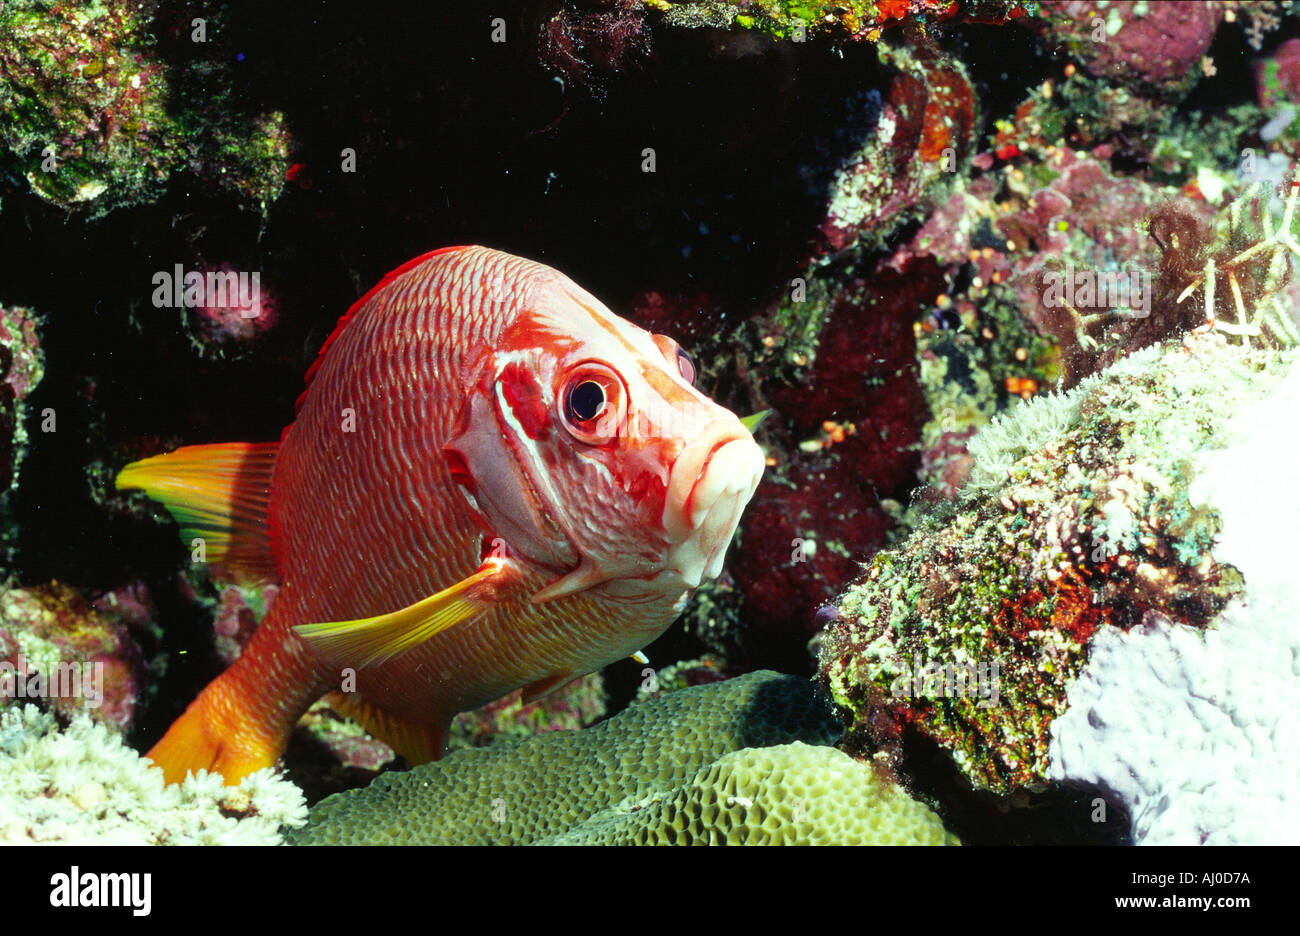 soldierfish under the water. Stock Photo